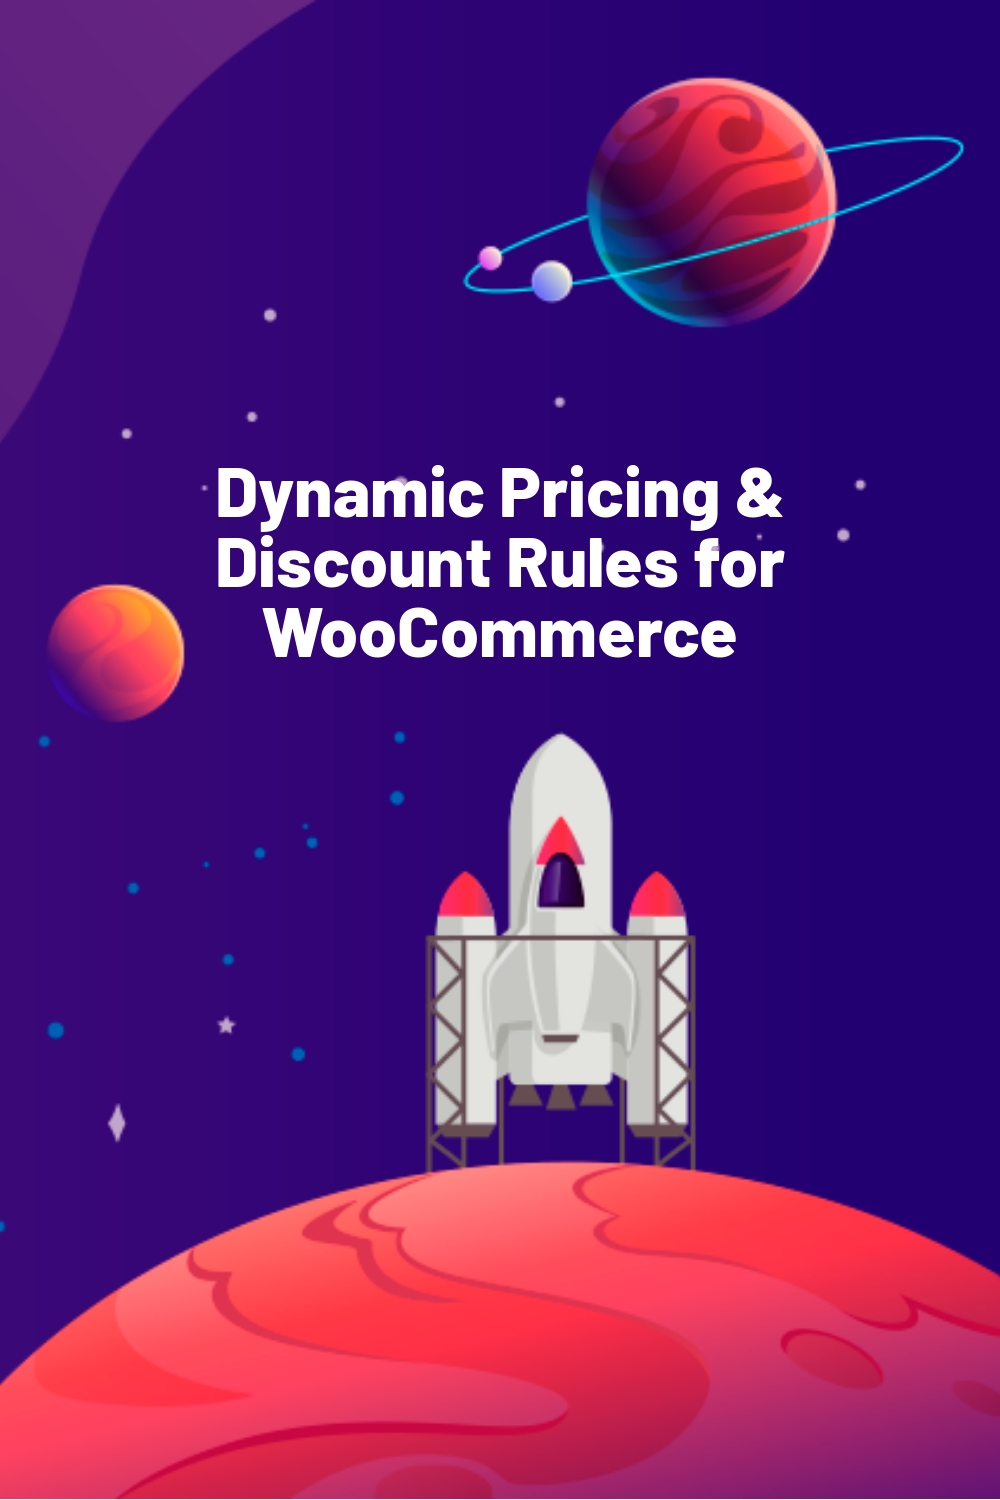 Dynamic Pricing & Discount Rules for WooCommerce